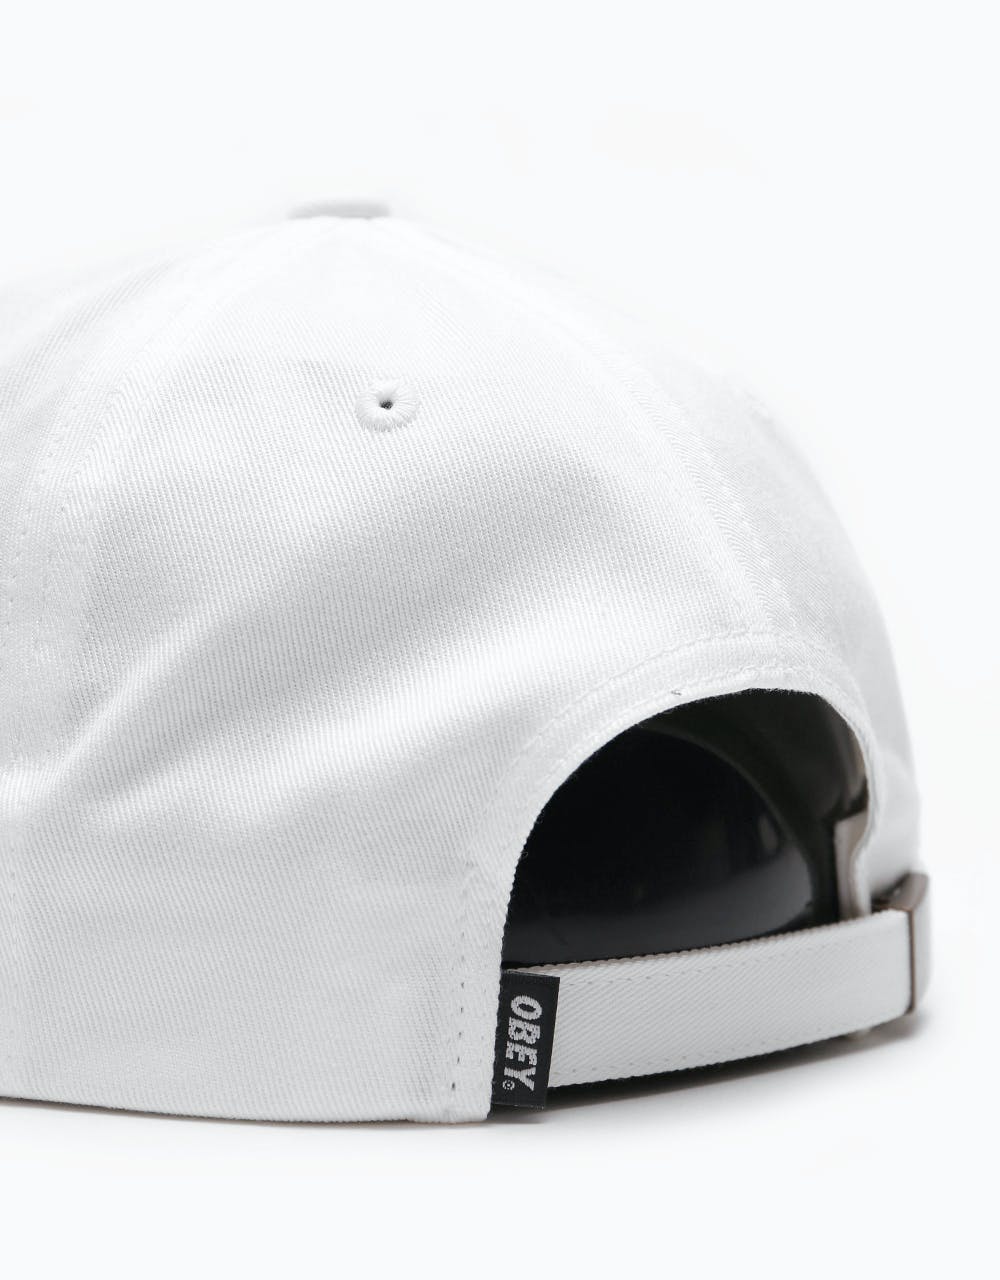 Obey Flower 6 Panel Cap - White